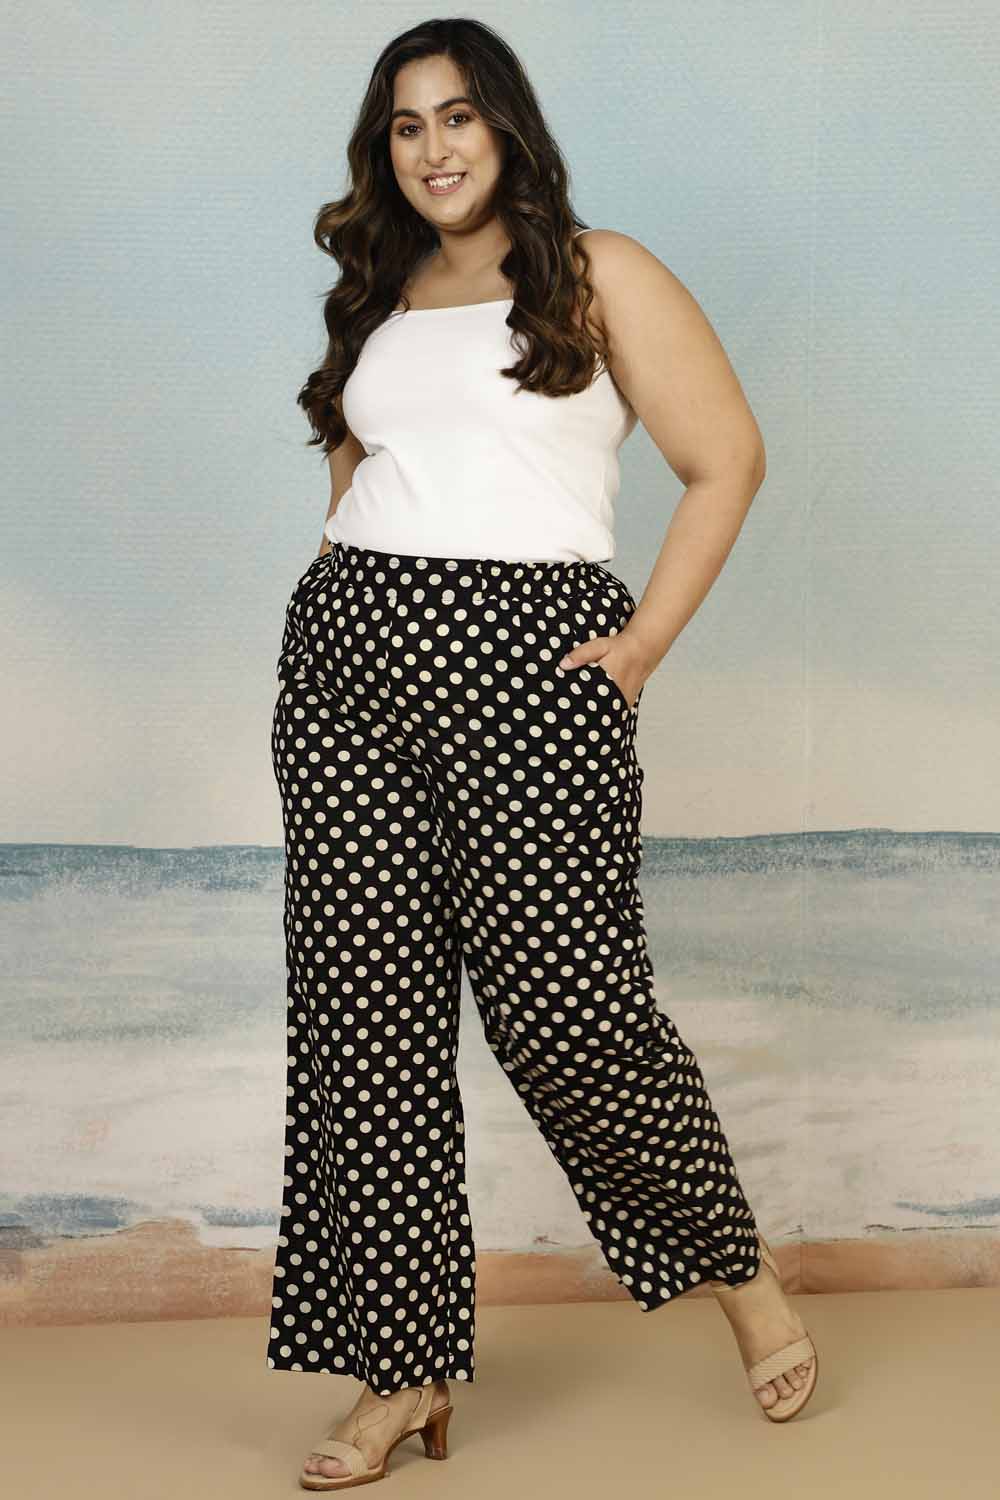 New SATINA Tan High Waisted Leggings for Women, 3 Inch Waistband, Plus  Size